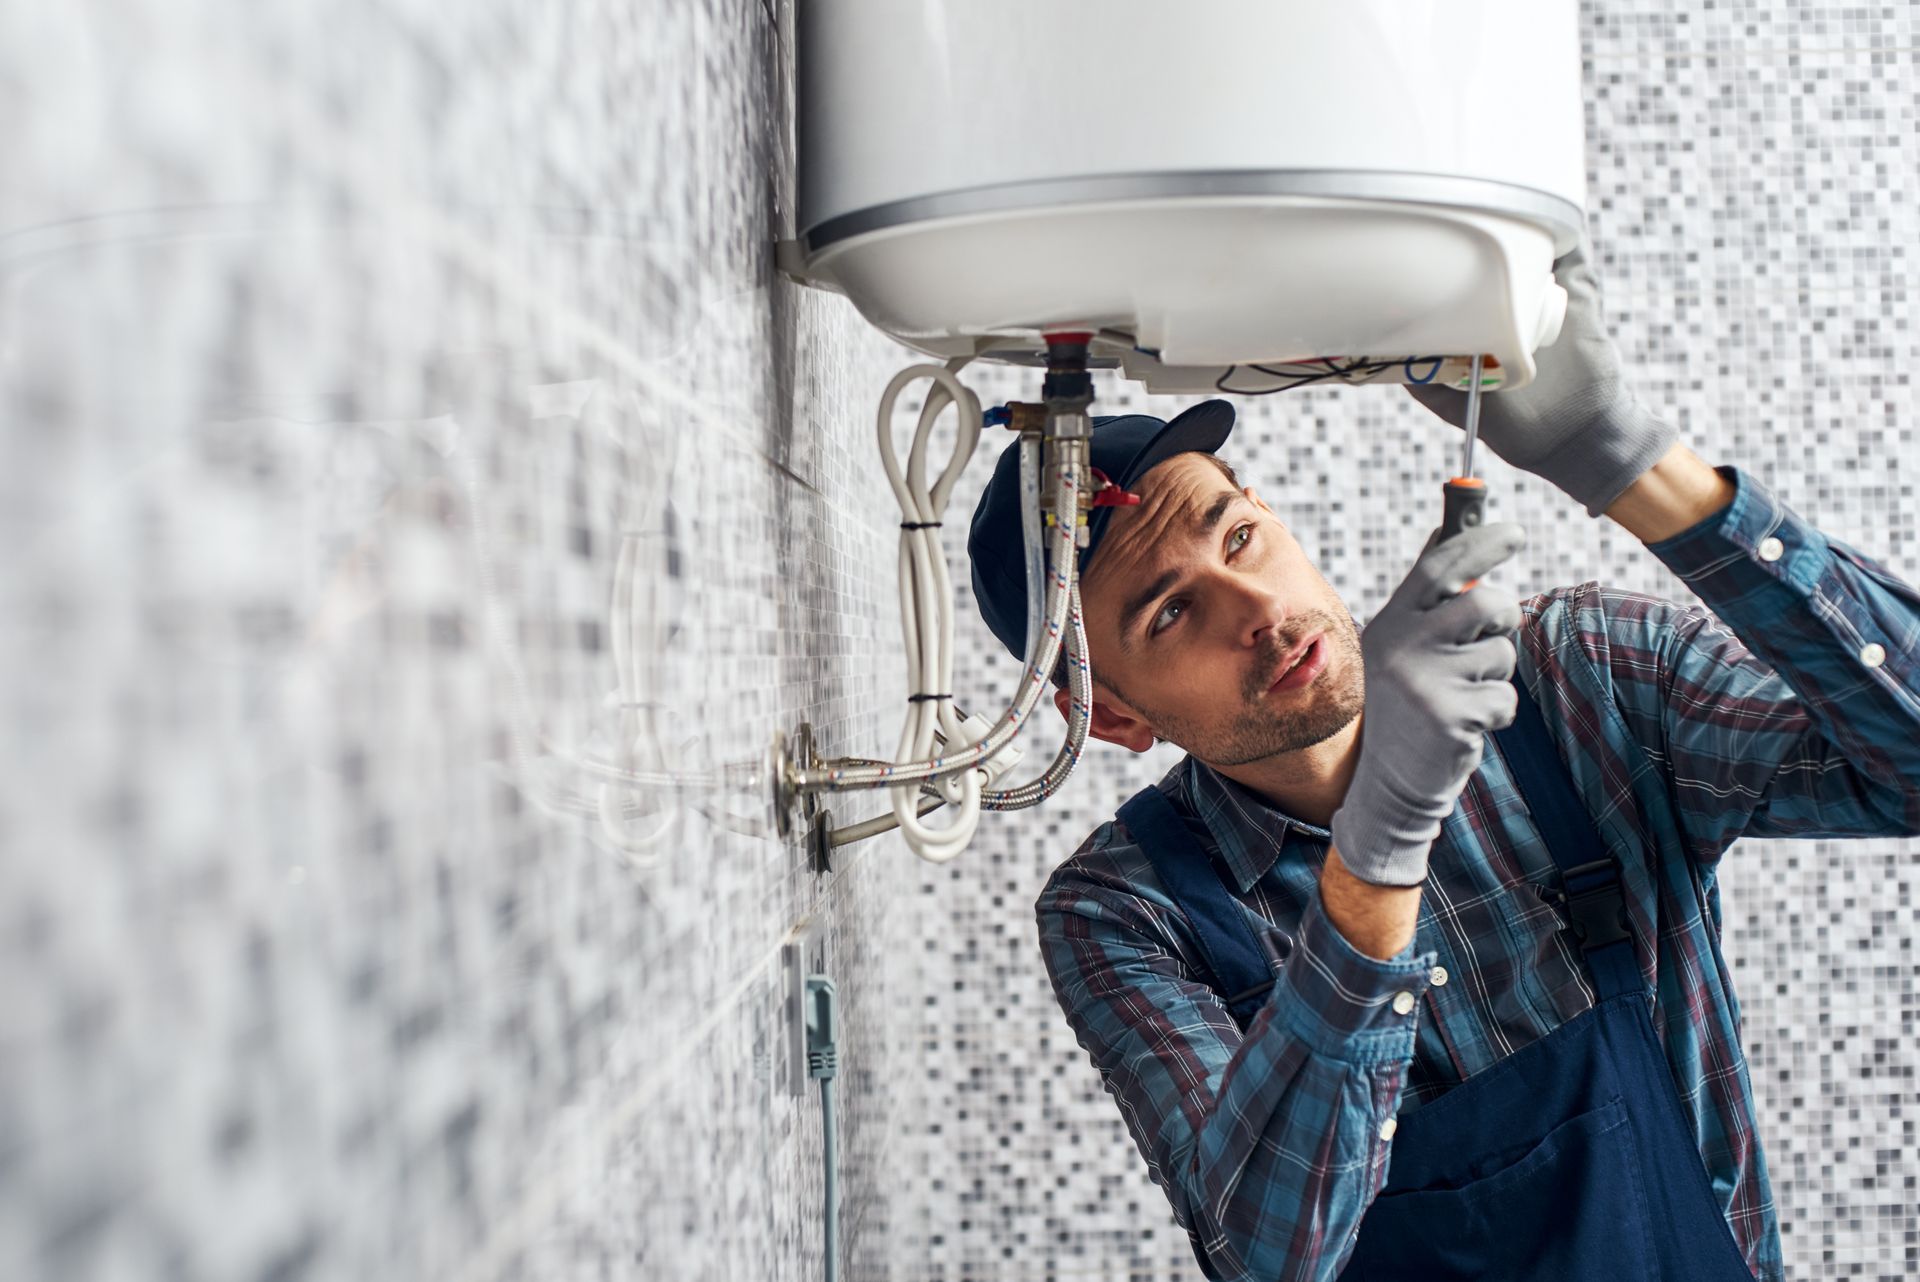 a man is fixing a water heater in a bathroom .